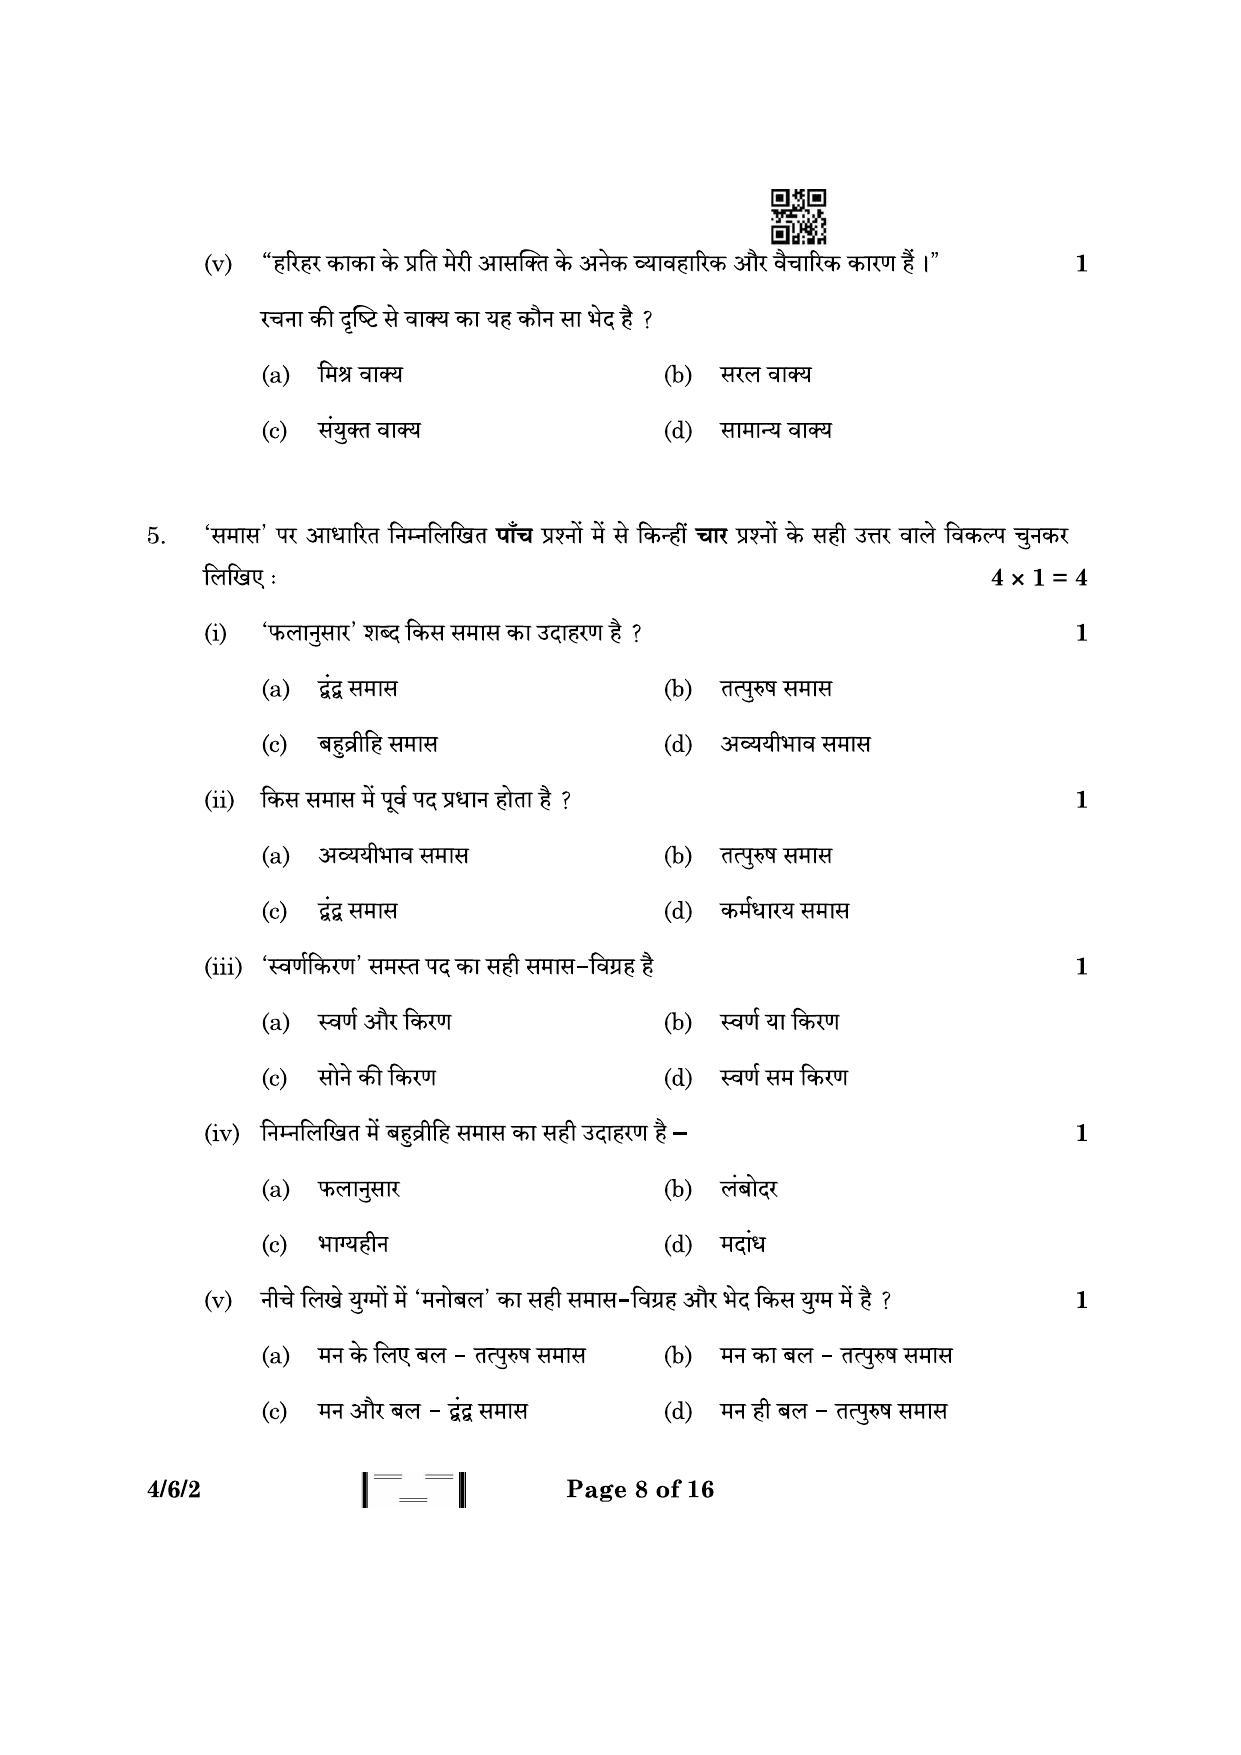 CBSE Class 10 4-6-2 Hindi B 2023 Question Paper - Page 8